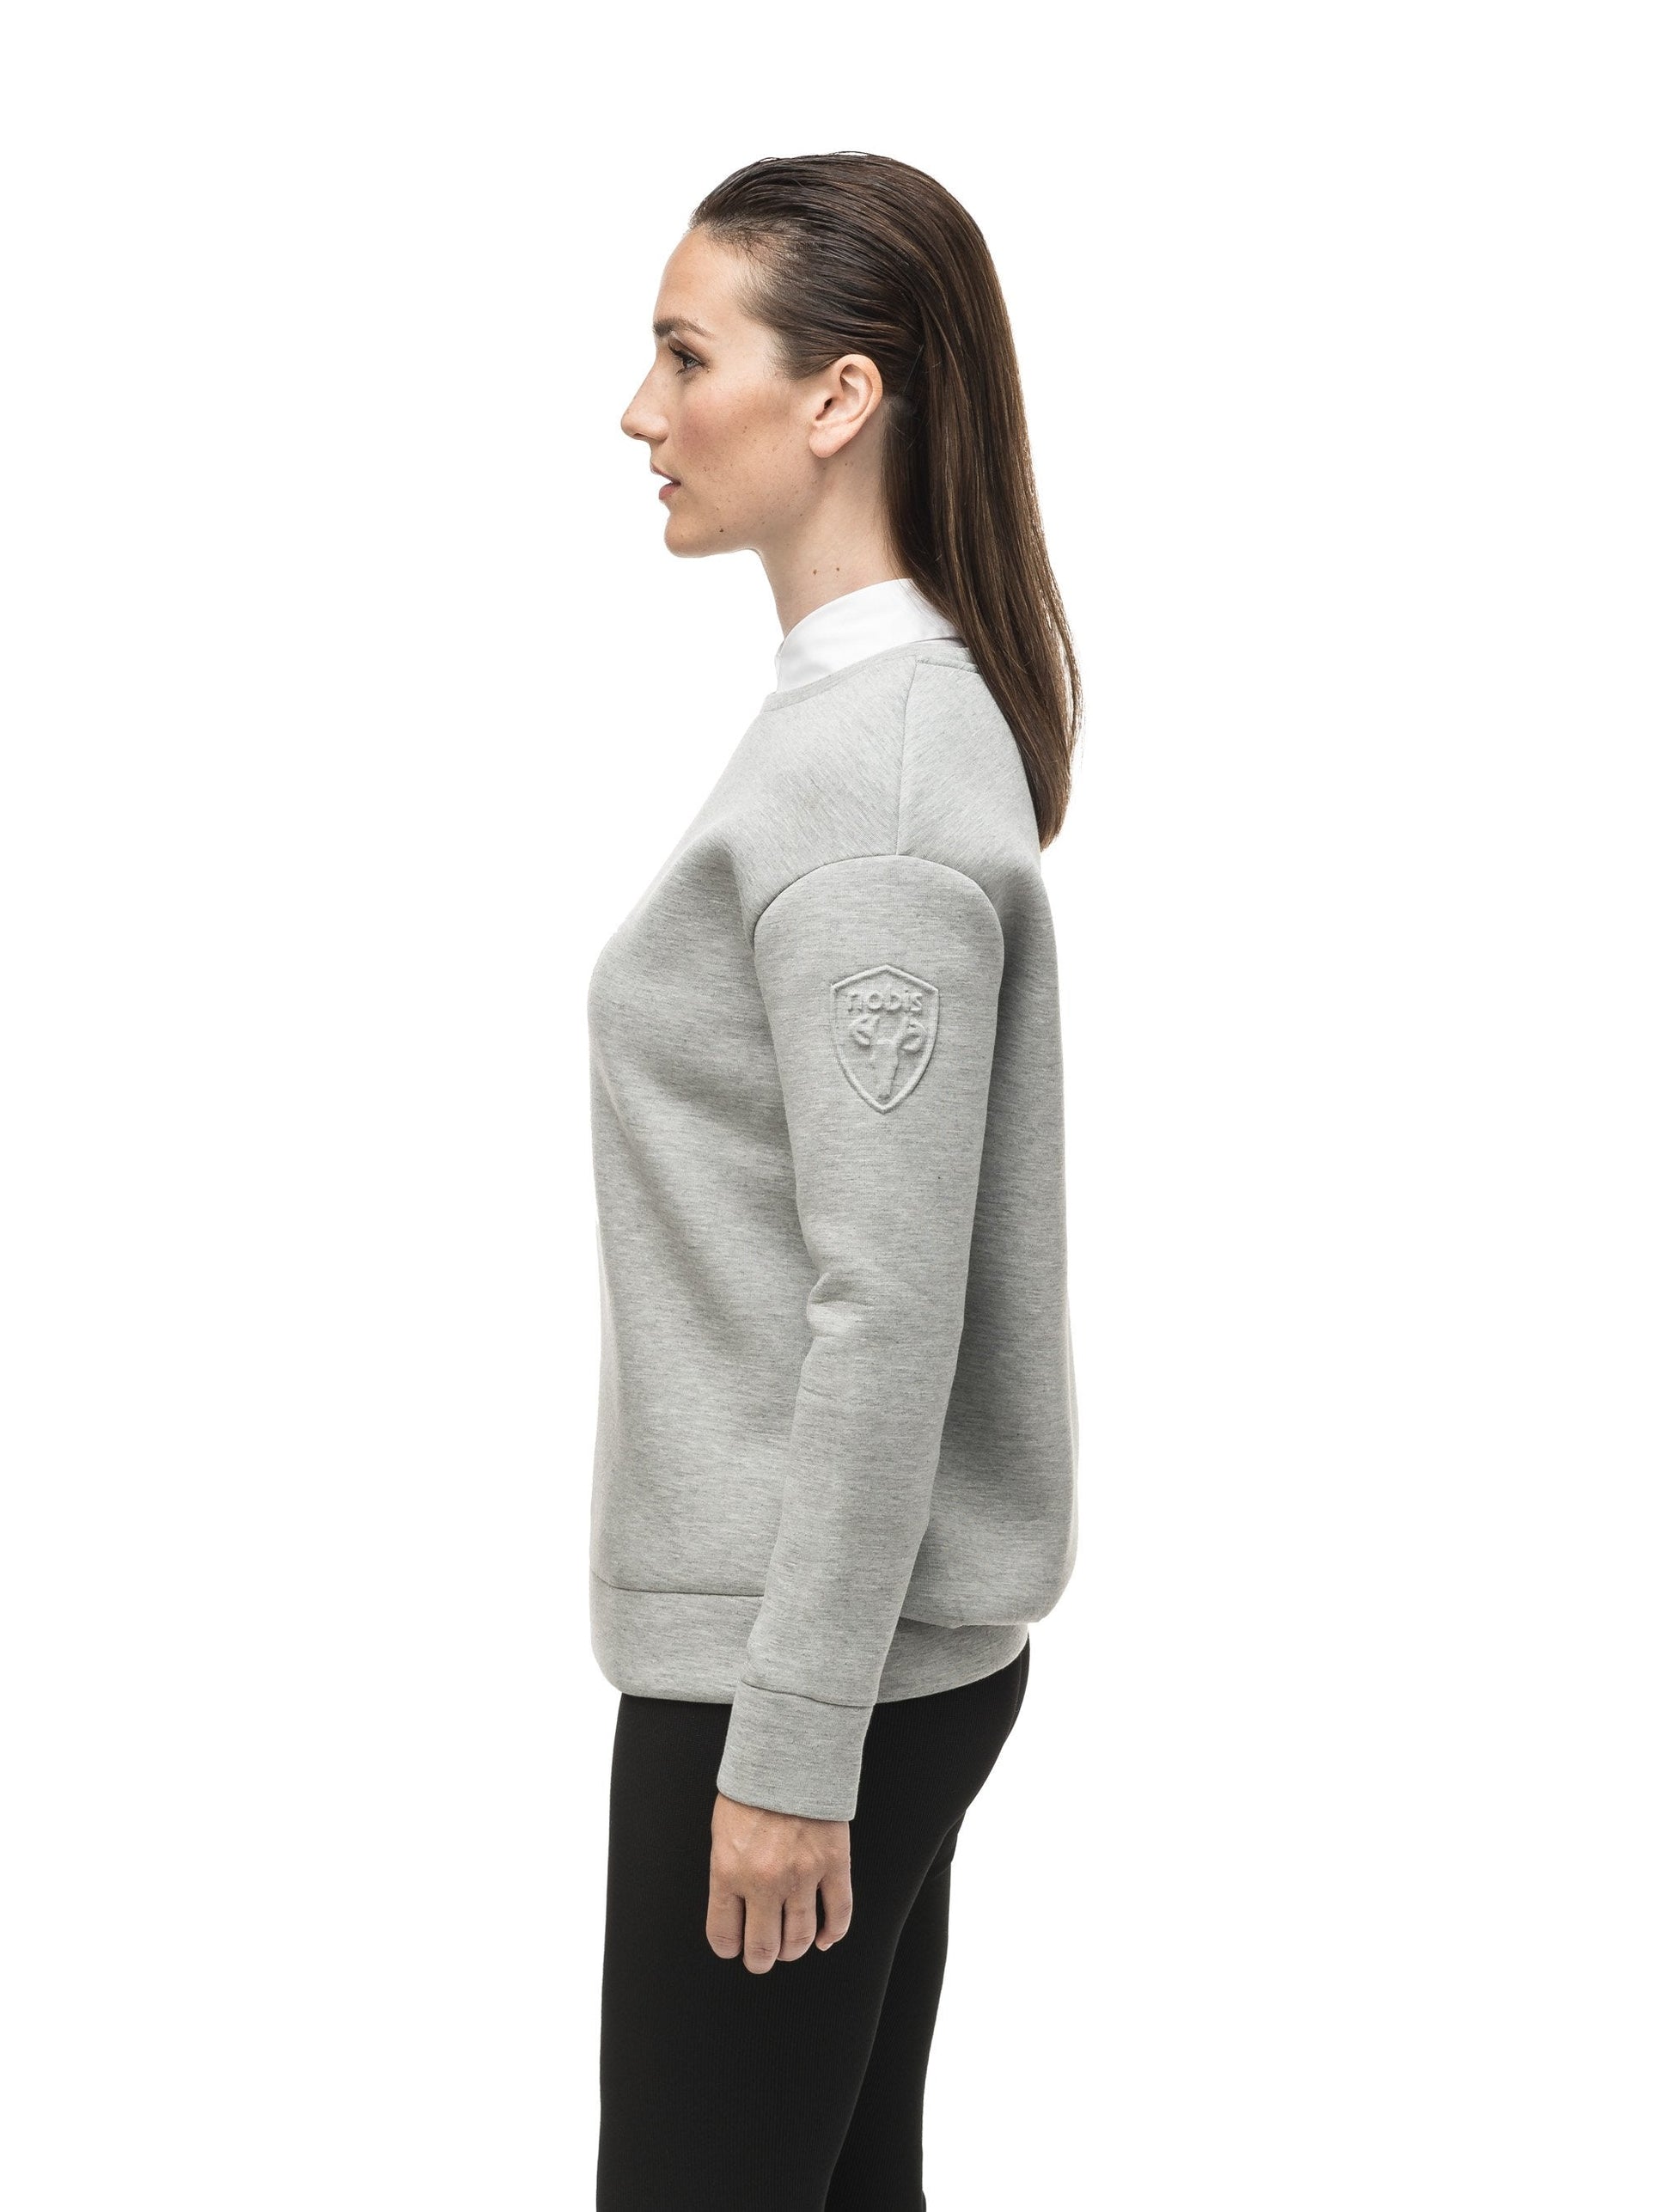 Classic women's crew neck pullover with fold over hem detail in Grey Melange